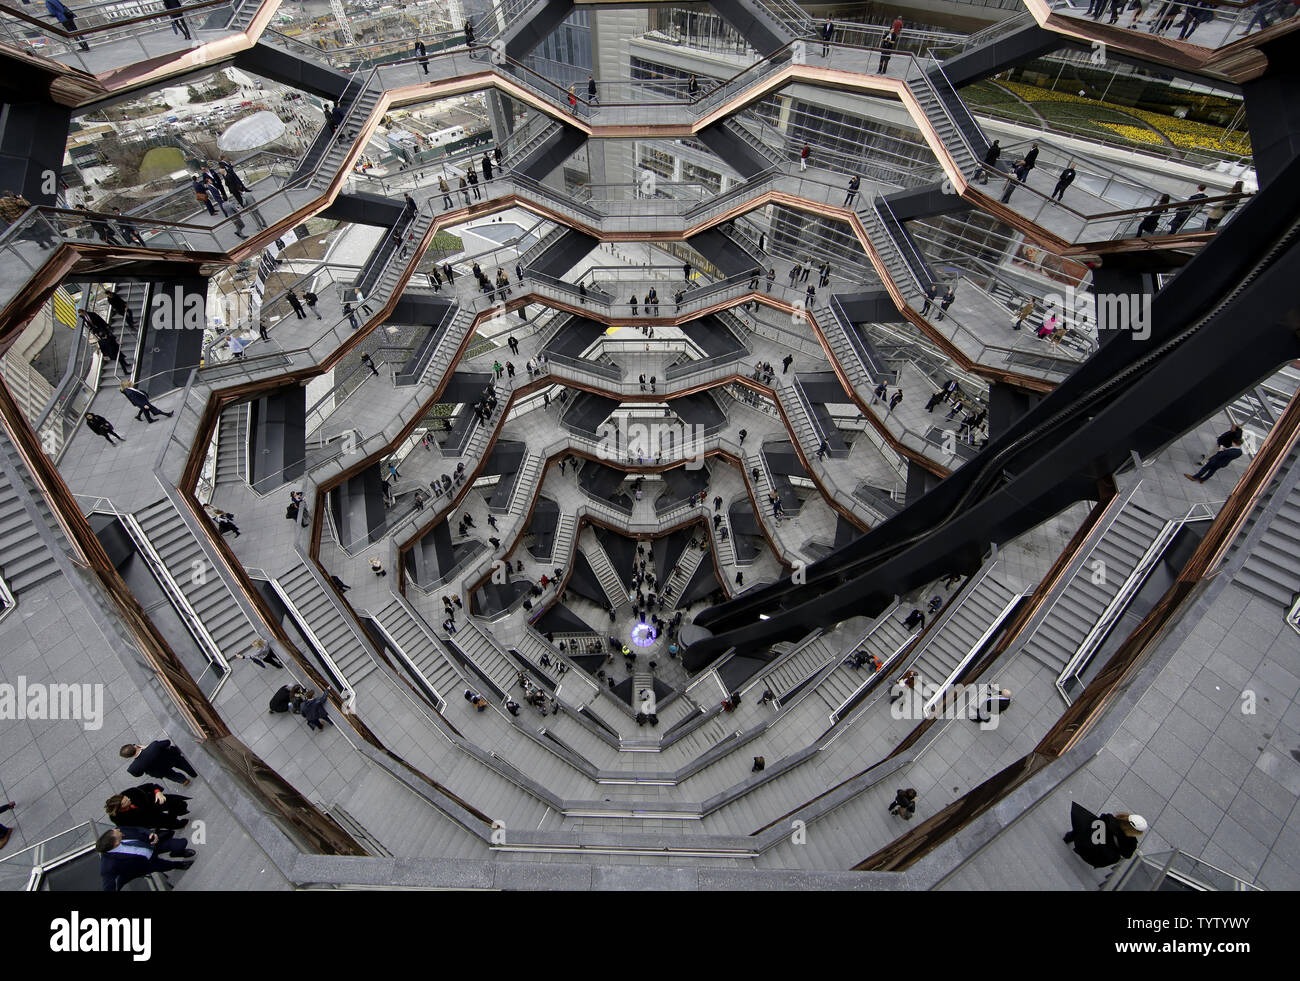 People walk through The Vessel at the Grand Opening of Hudson Yards in New York City on March 15, 2019. A towering sculpture called Vessel made up of 2,500 twisting steps the public can climb is scheduled to open Friday as the visual centerpiece of Hudson Yards which is a $25 billion urban complex on Manhattan's West Side that is the city's most ambitious development since the rebuilding of the World Trade Center. When fully complete, the 28-acre 11-hectare site will include 16 towers of homes and offices, a hotel, a school, the highest outdoor observation deck in the Western Hemisphere, a per Stock Photo